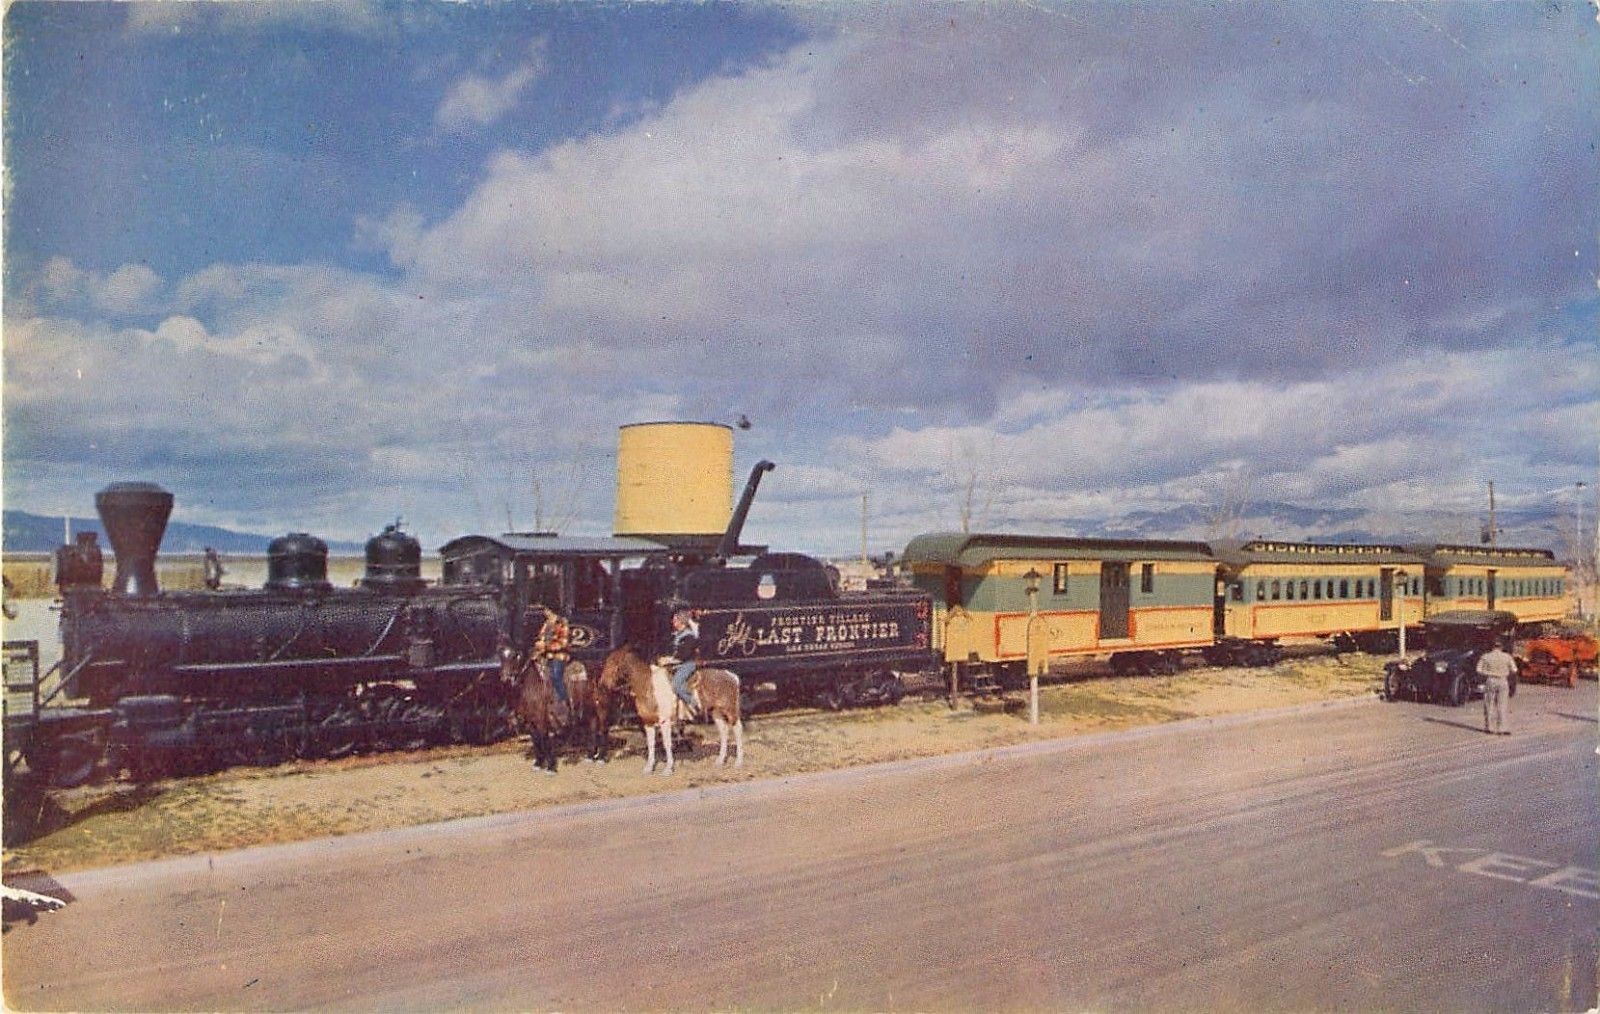 c1950s-The-Old-Train-at-Last-Frontier-Village.jpg